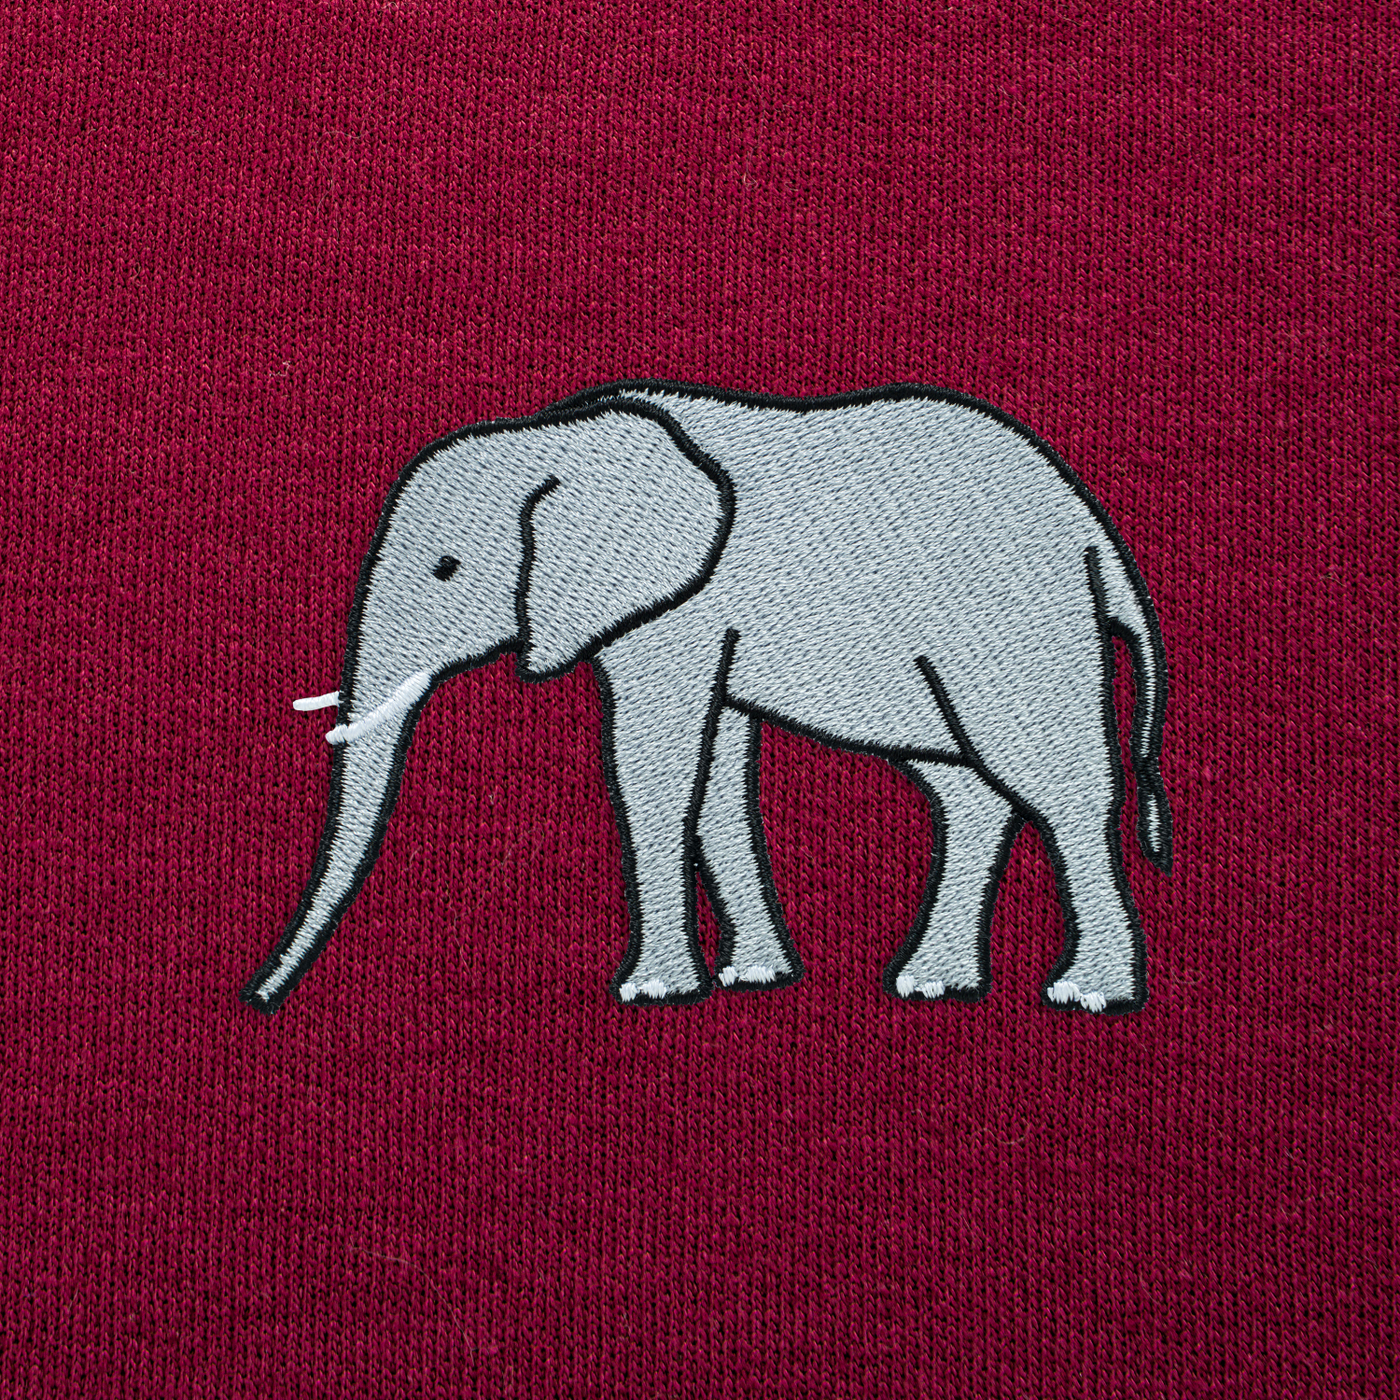 Bobby's Planet Men's Embroidered Elephant Hoodie from African Animals Collection in Maroon Color#color_maroon